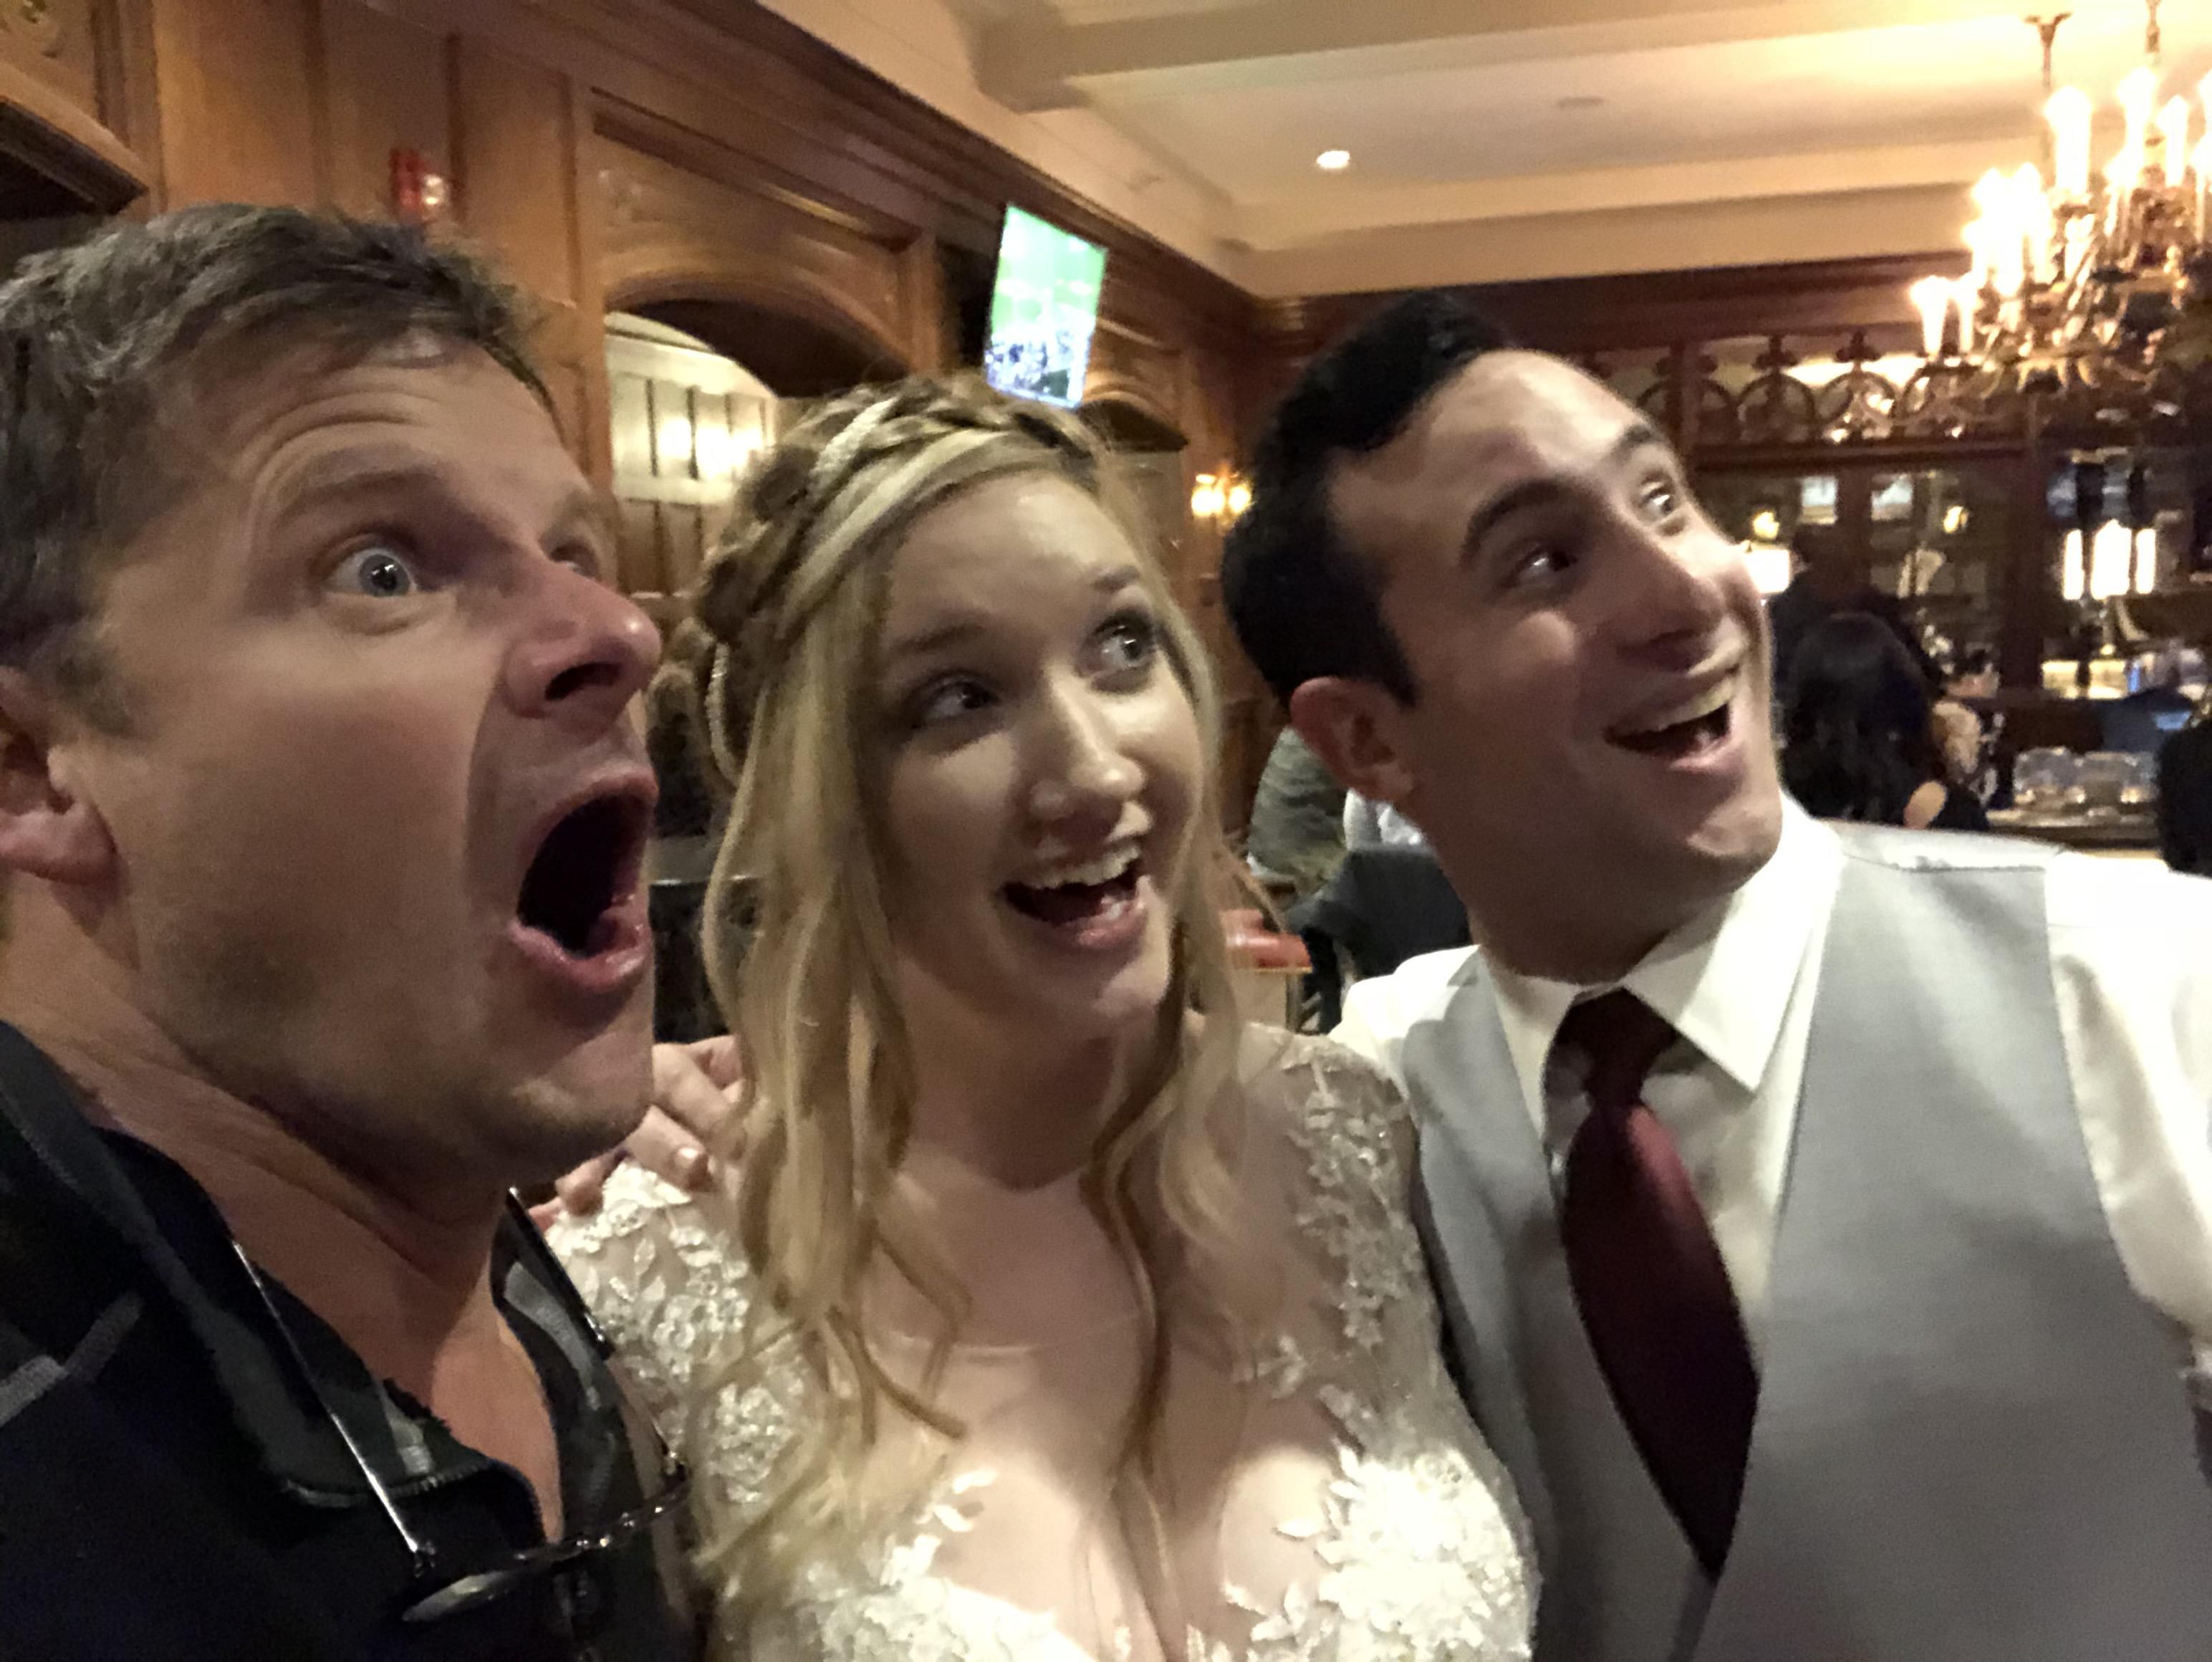 Last night was our wedding and actor Steve Zahn was staying at our hotel. He was super nice and had us do this goofy pose.